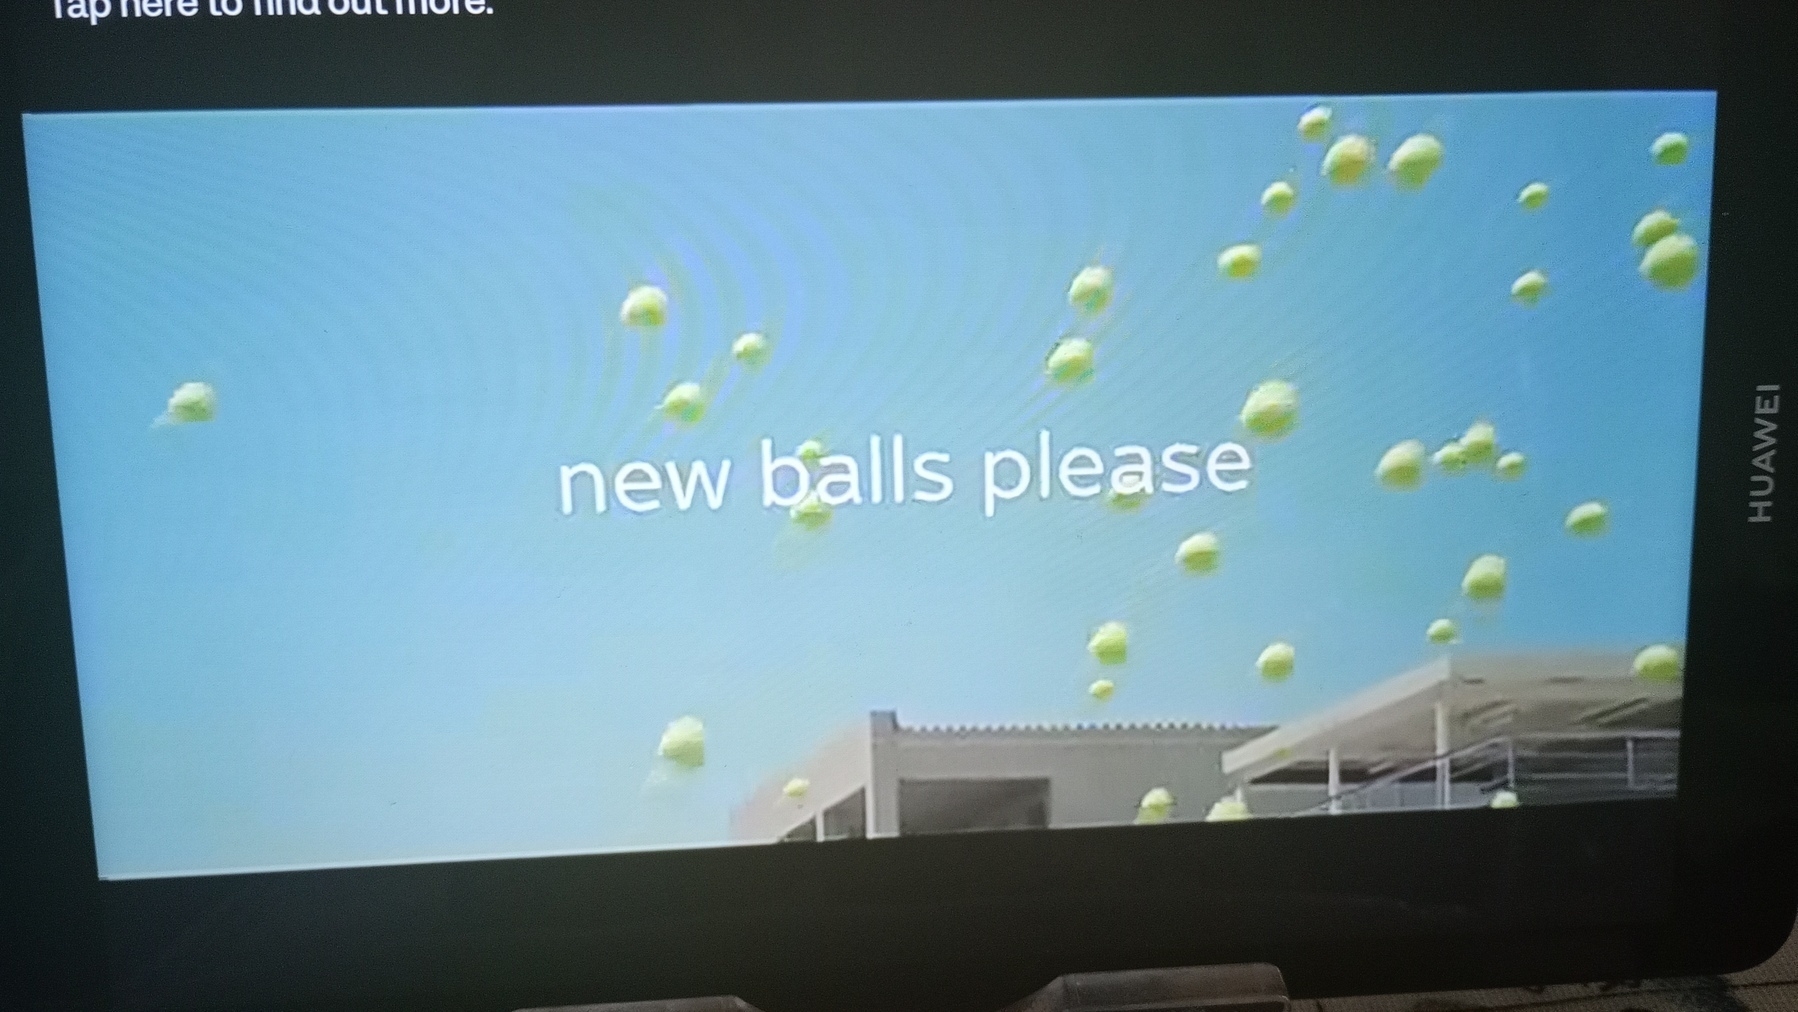 Screen capture from parody of bouncing balls Sony advert